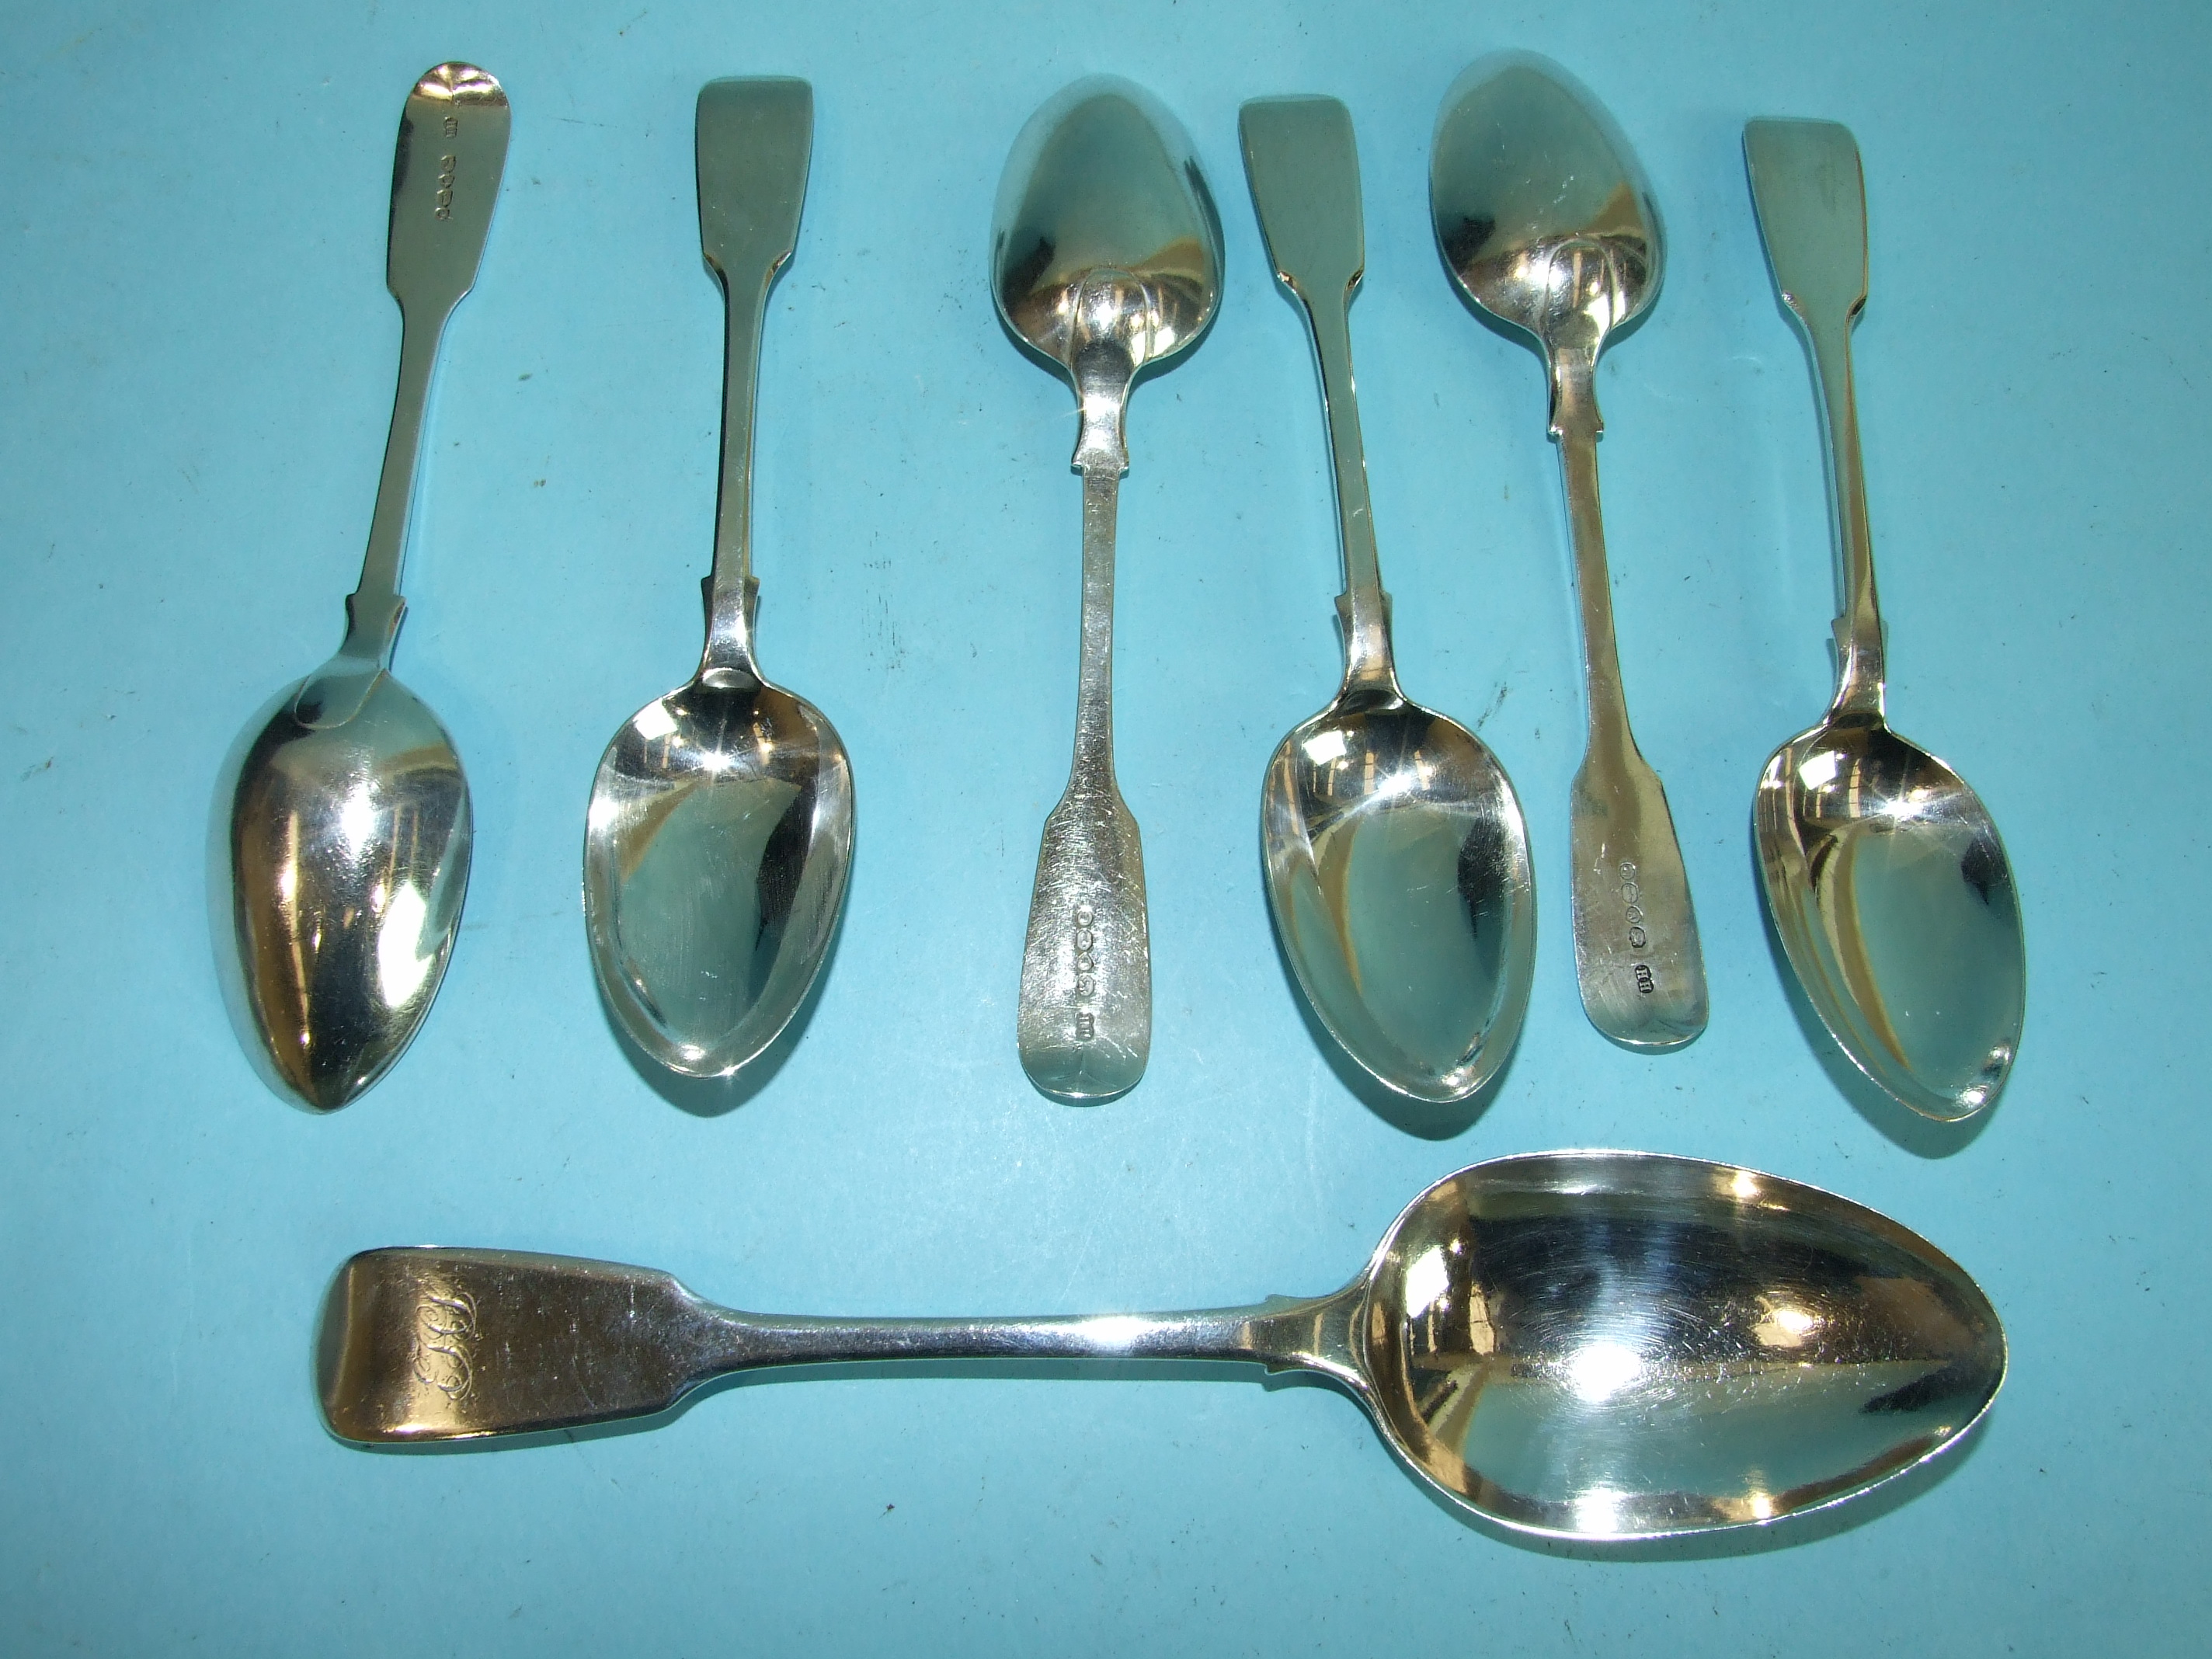 A set of six Victorian fiddle pattern dessert spoons, London 1864 and an Exeter tablespoon, 1843, by